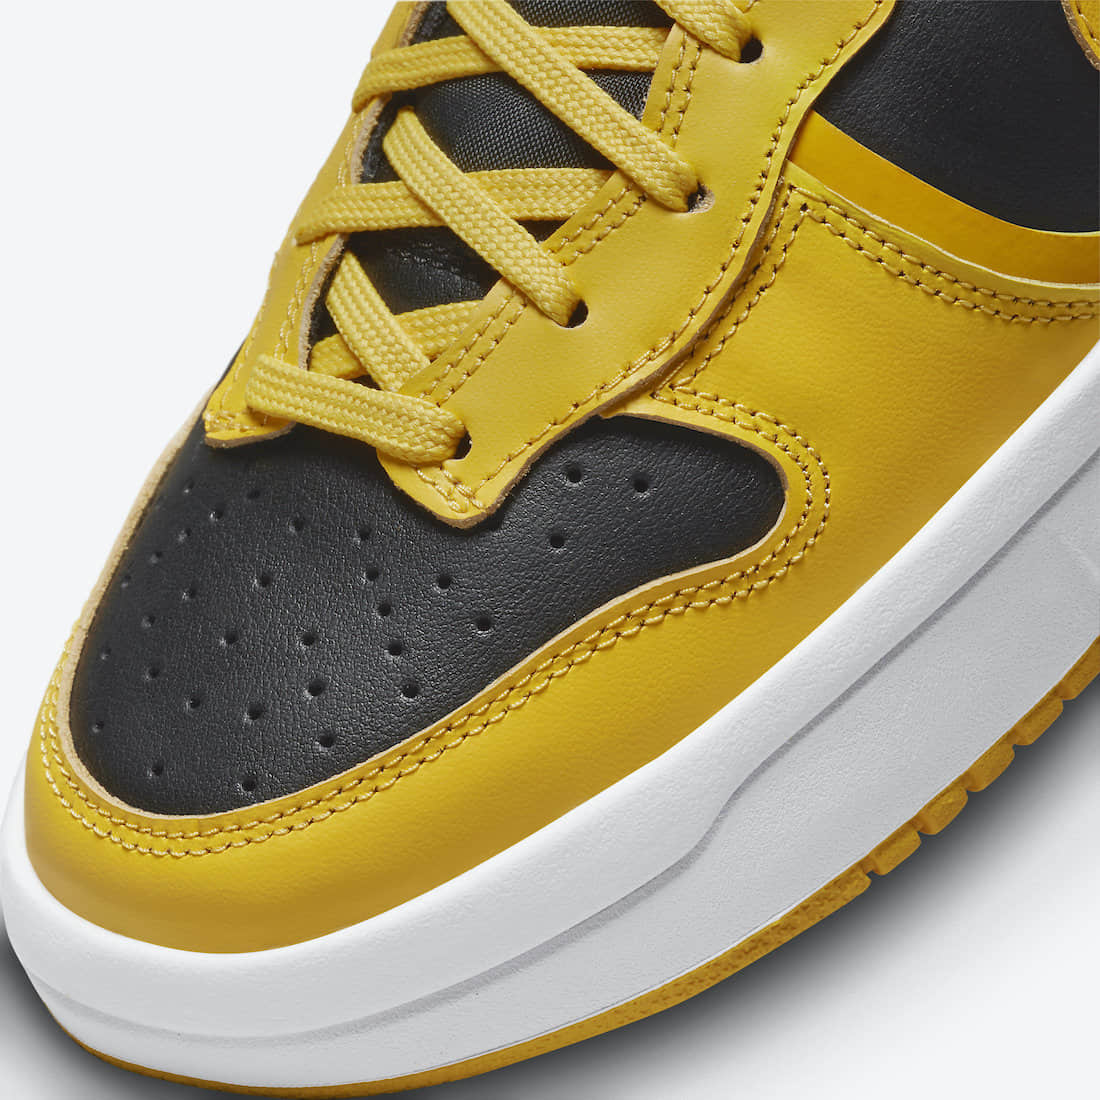 Nike Dunk High Up 'Goldenrod' DH3718-001 - Stylish & Bold Sneakers for Men